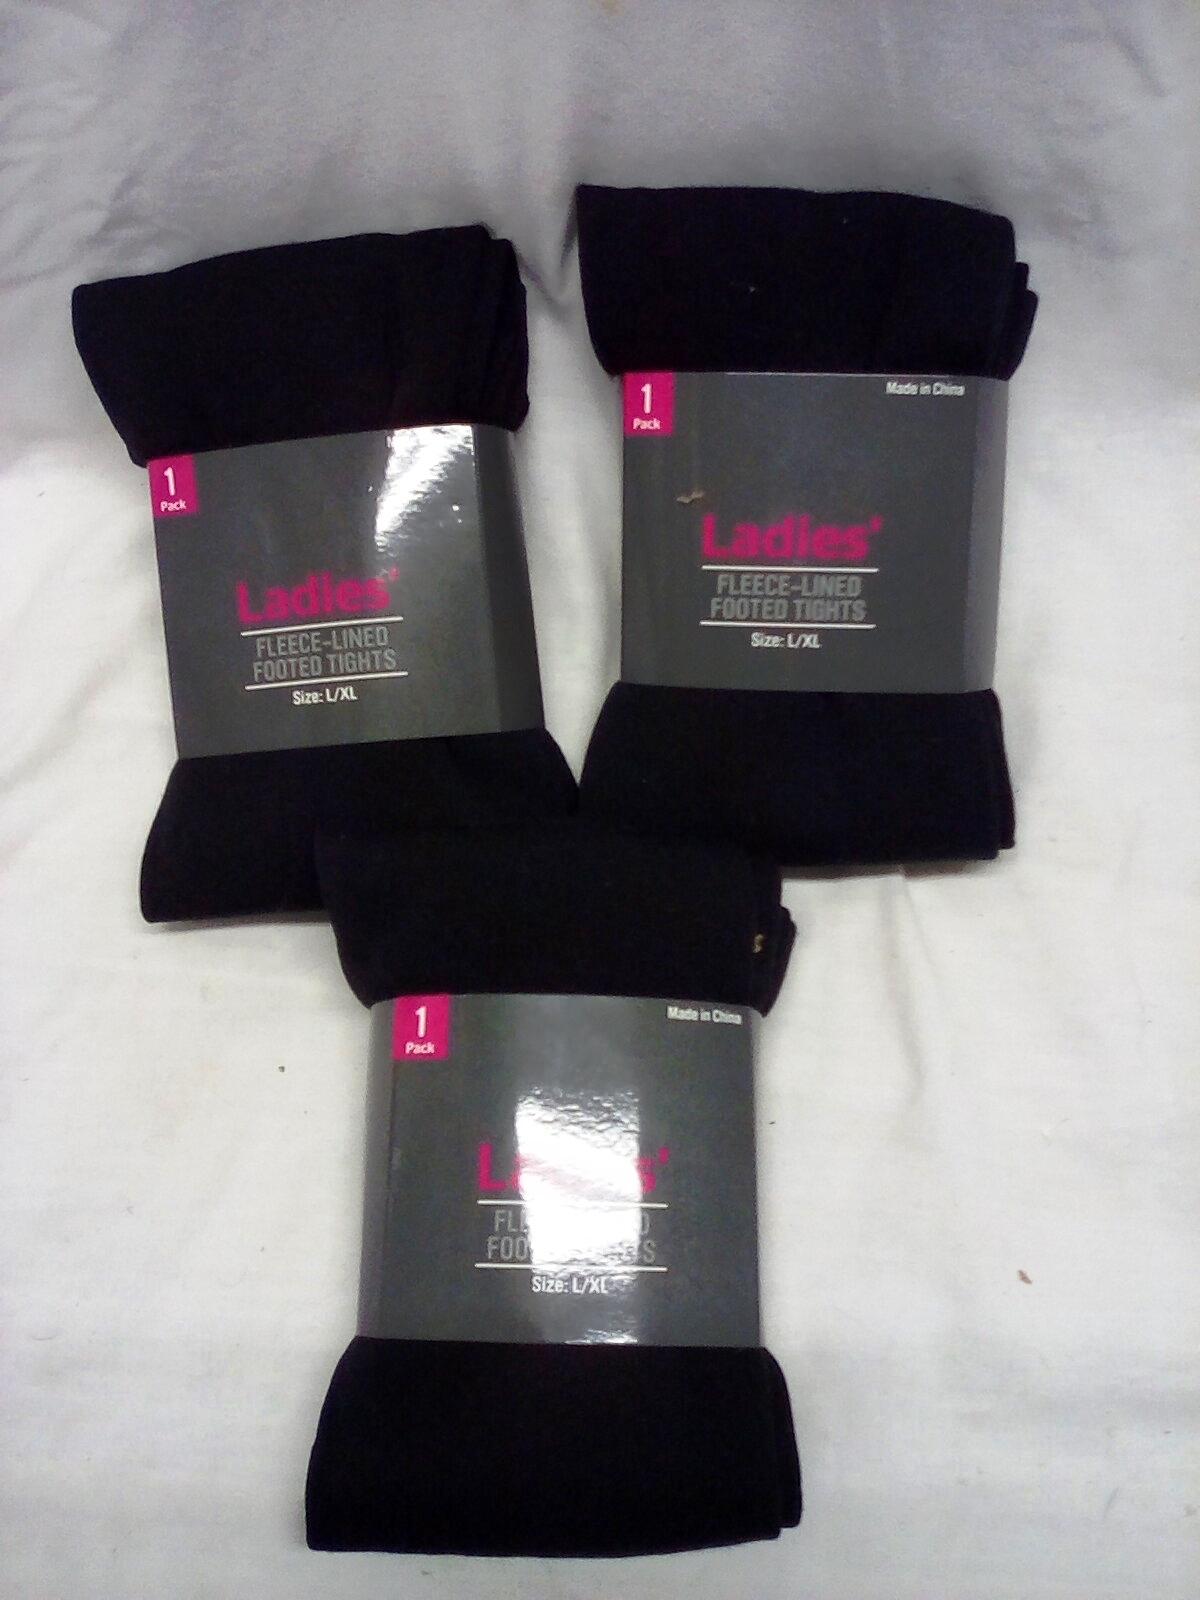 3 pair Ladies Fleece- Lined Footed Tights size L/XL